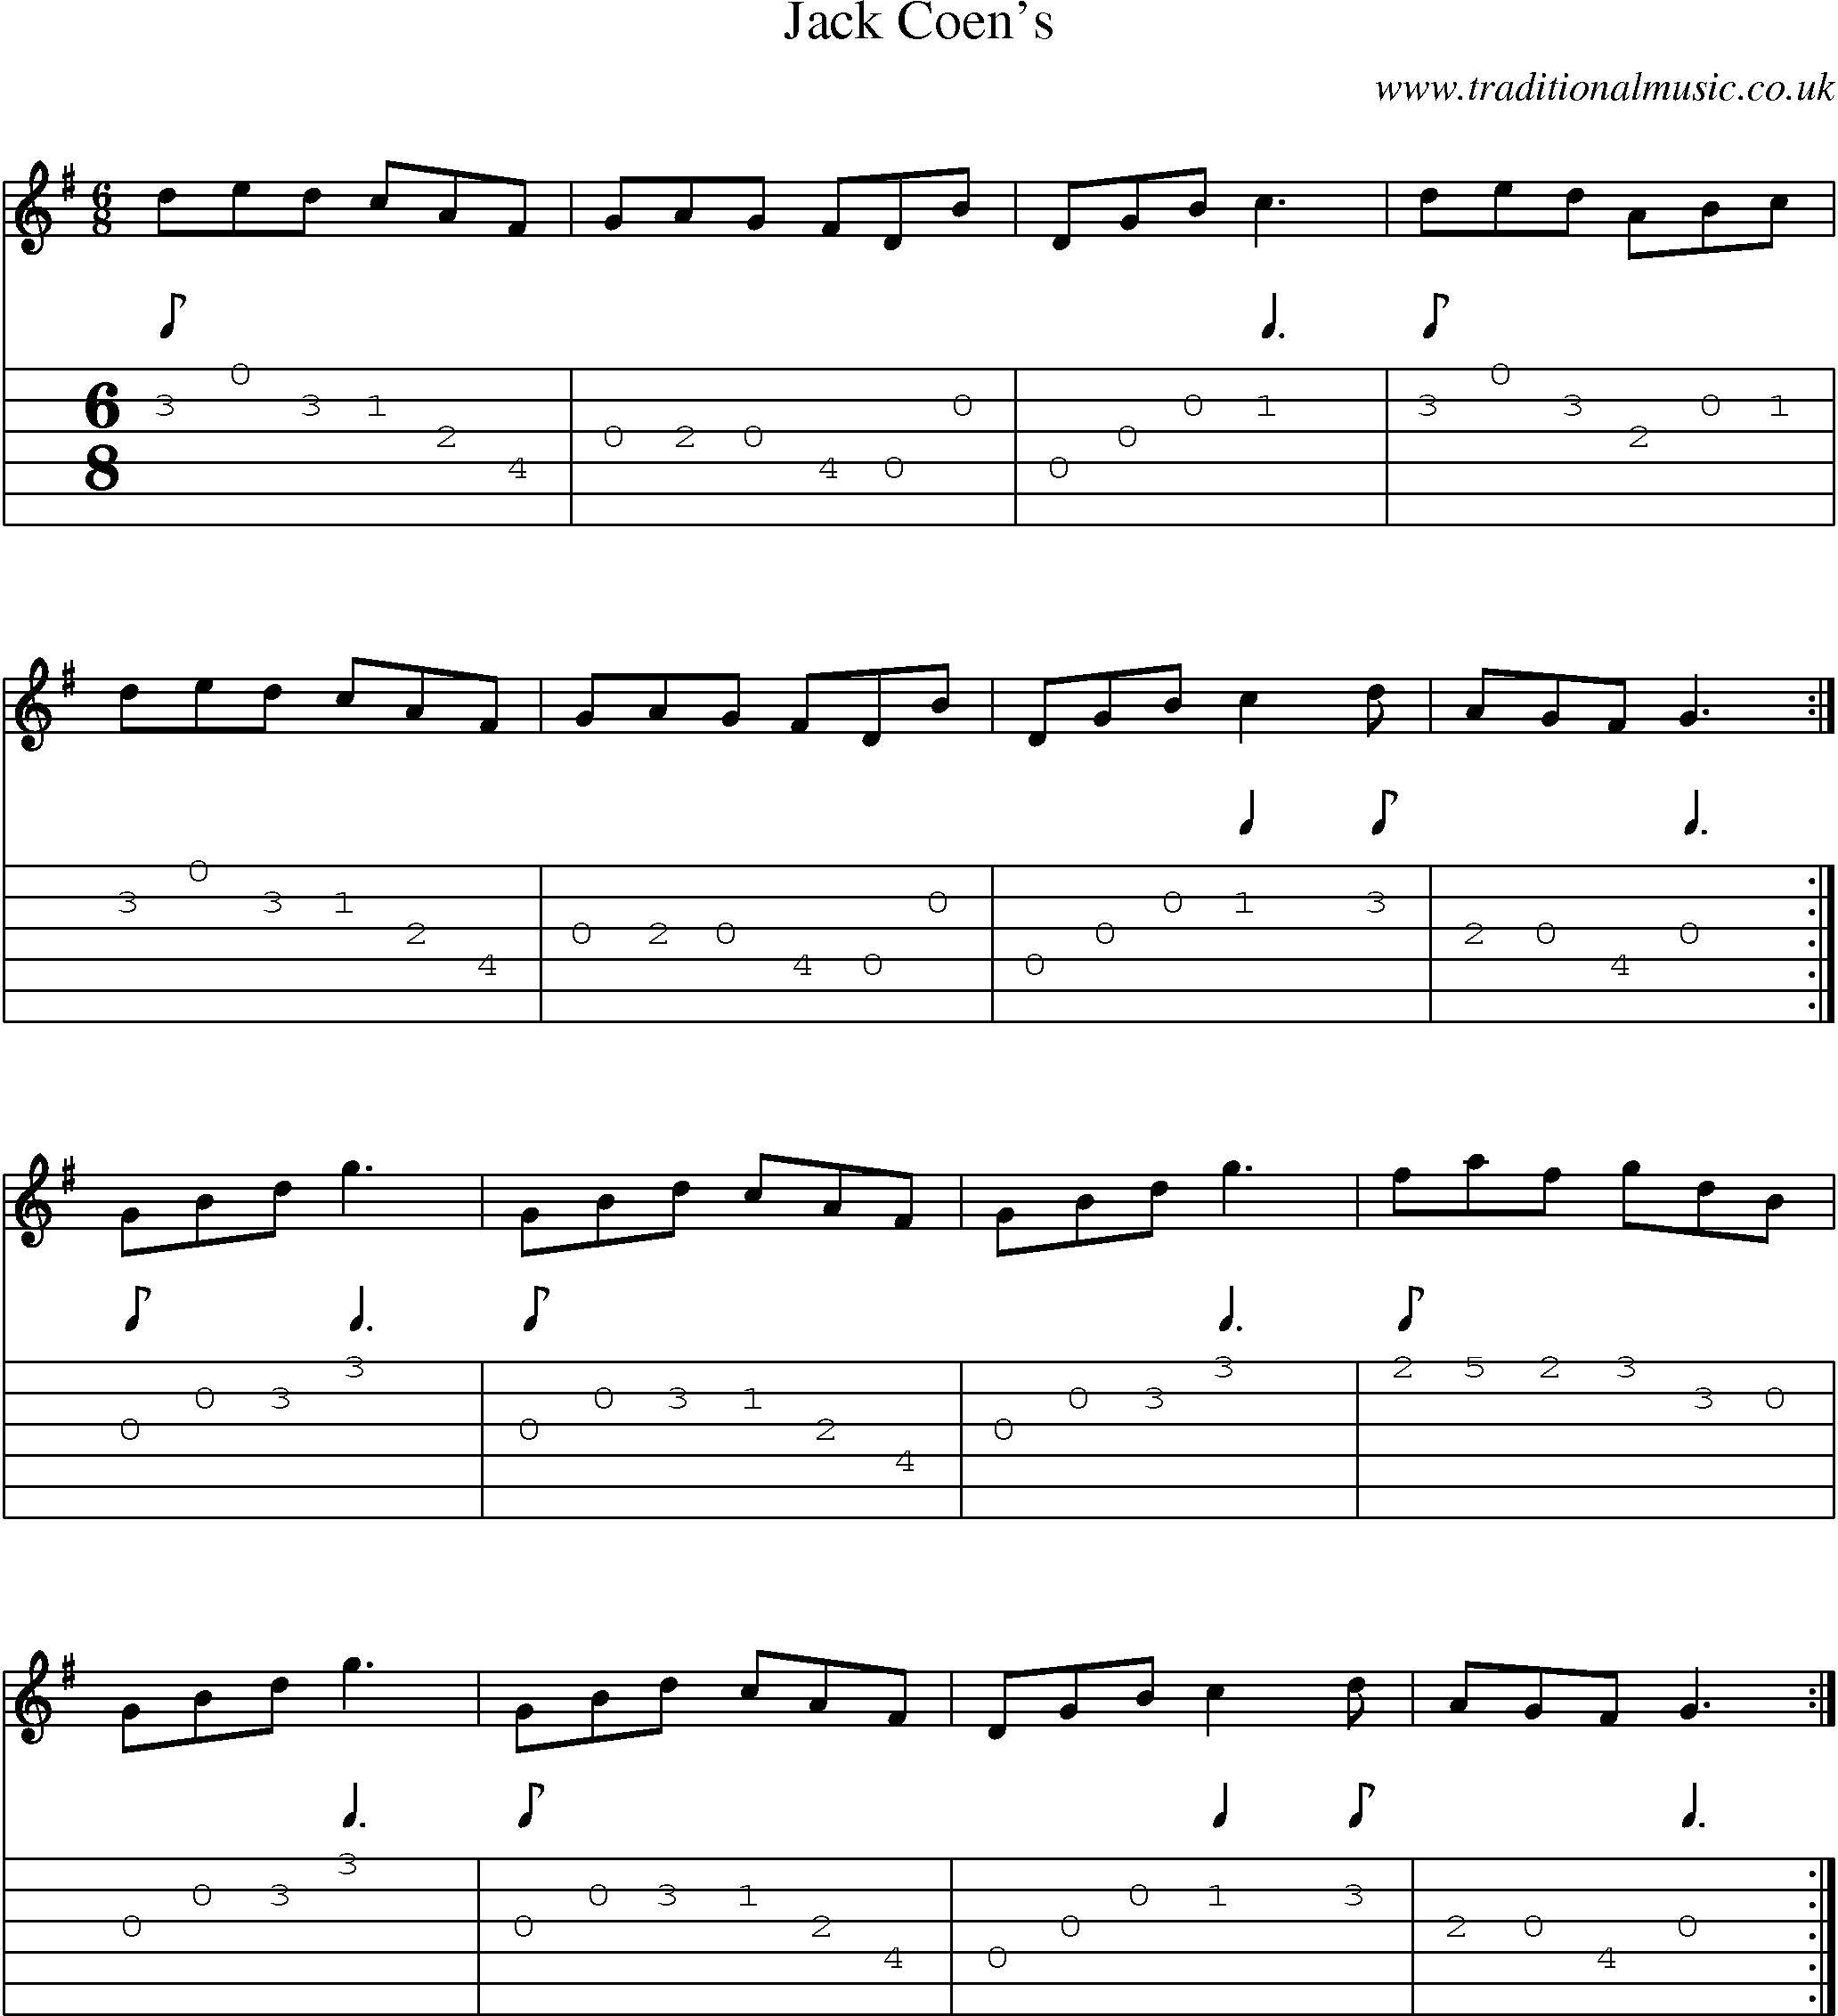 Music Score and Guitar Tabs for Jack Coens